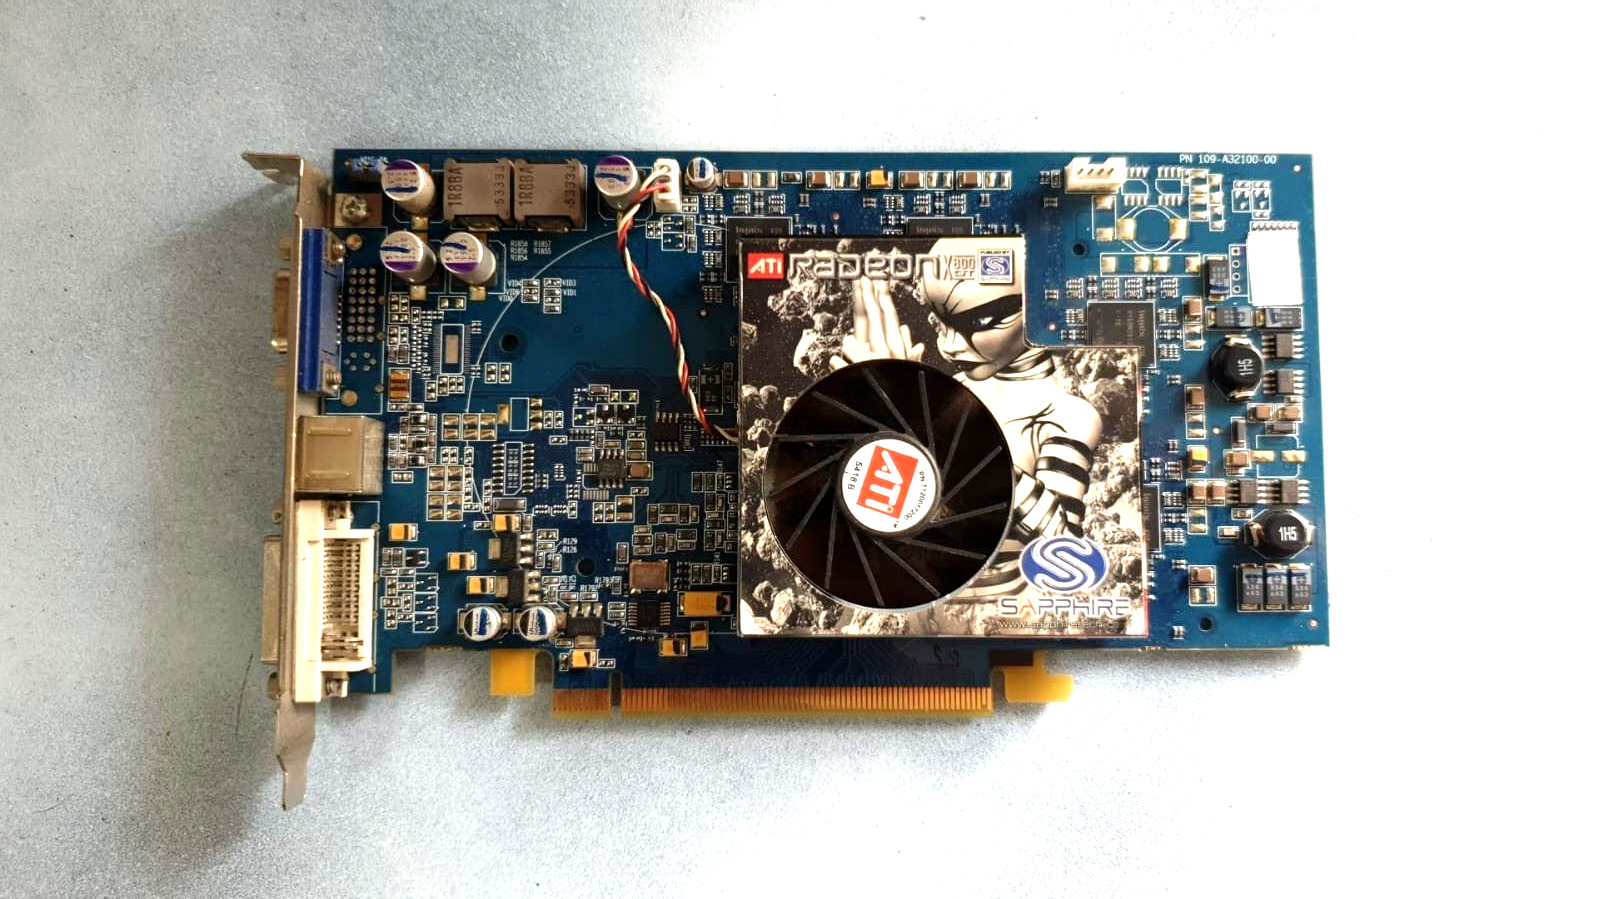 EXTERMELY RARE ATI Radeon X800 GT 128MB GPU Graphics Card In working condition.